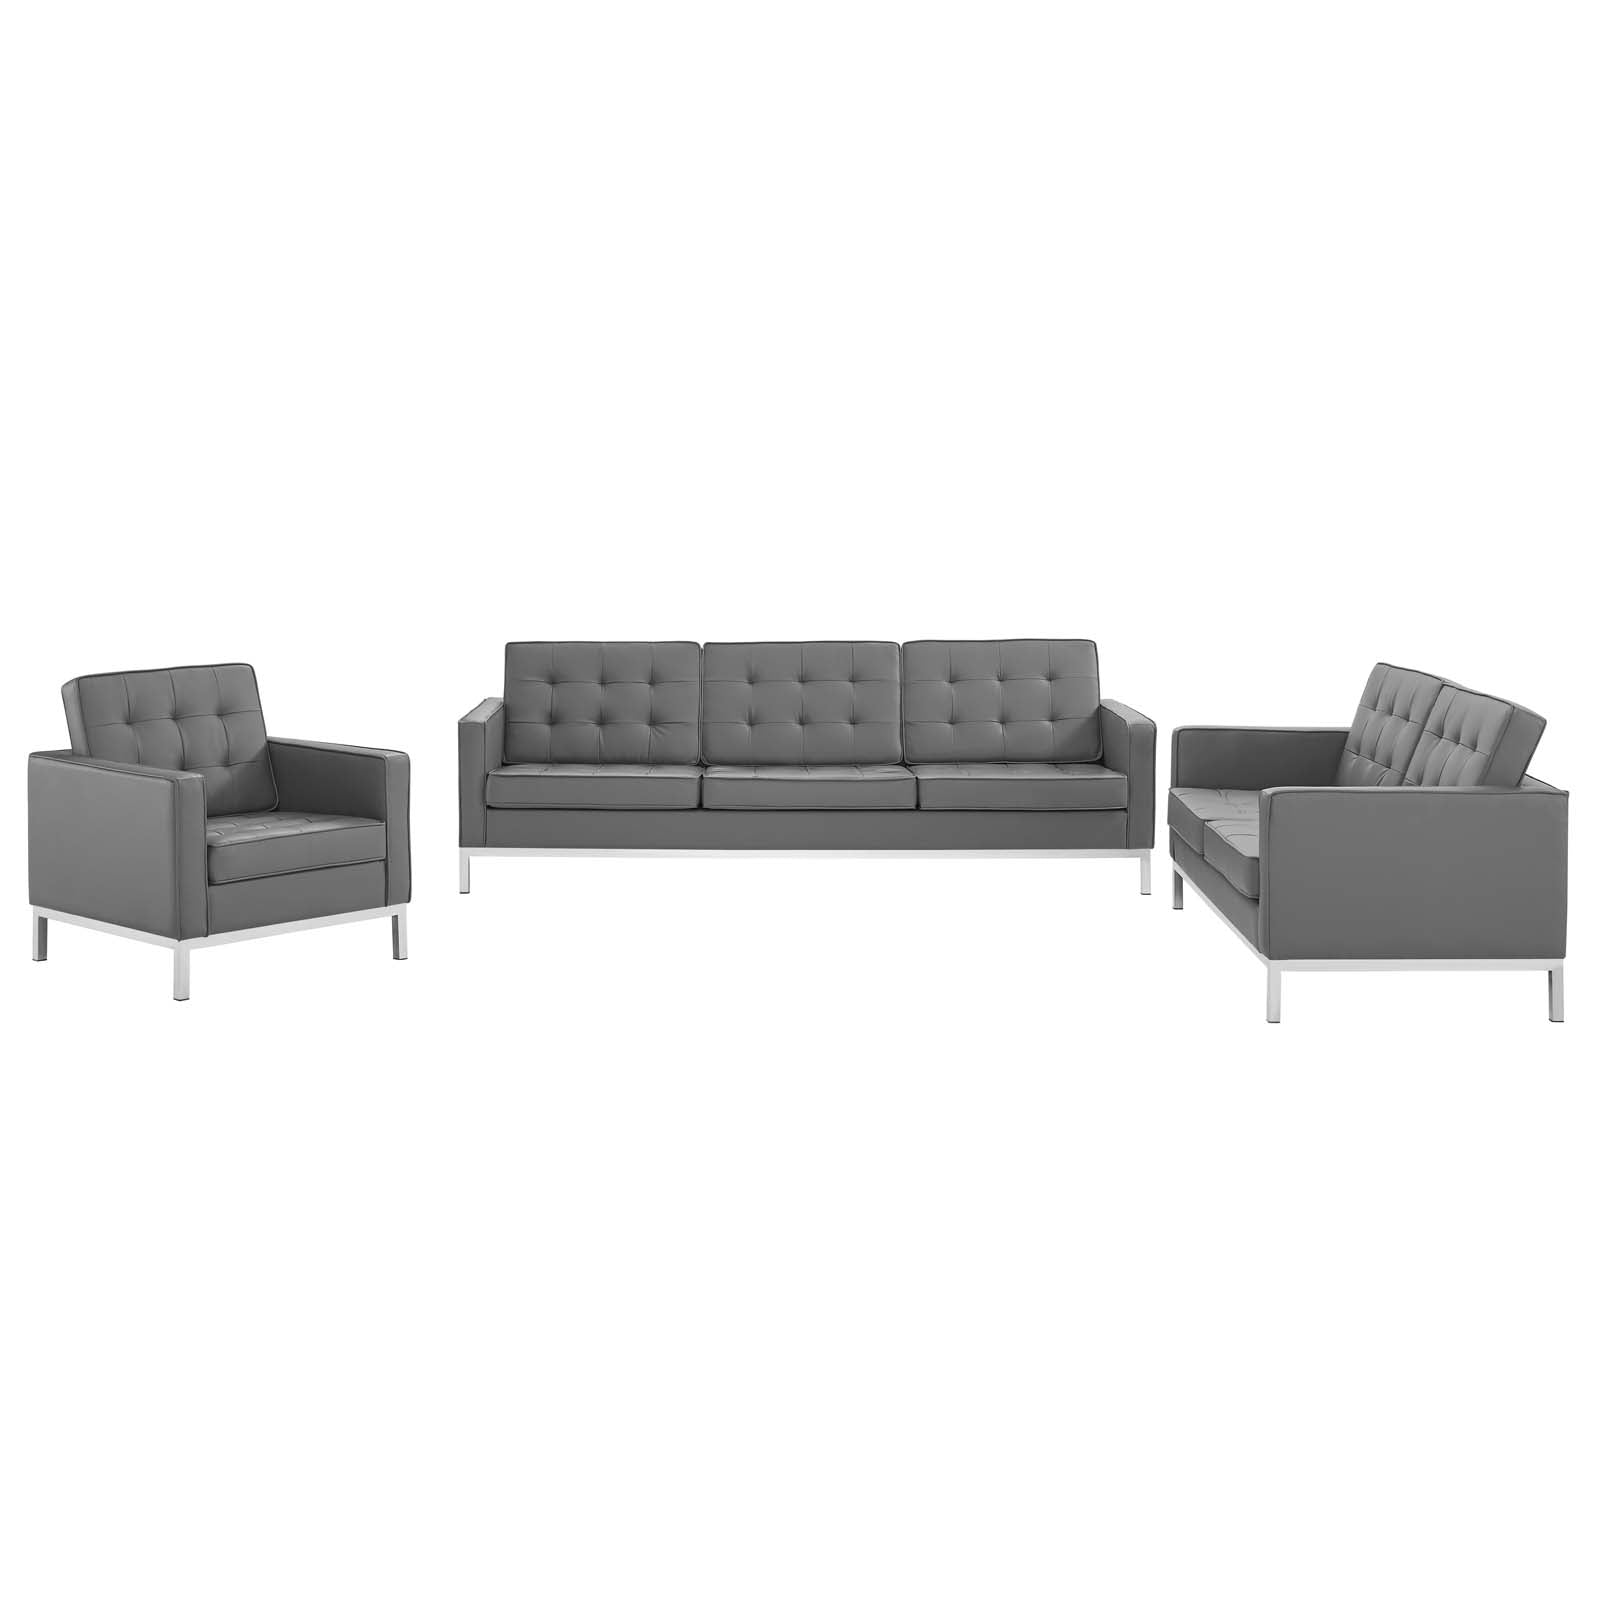 Modway Living Room Sets - Loft-Tufted-Upholstered-Faux-Leather-3-Piece-Set-Silver-Gray